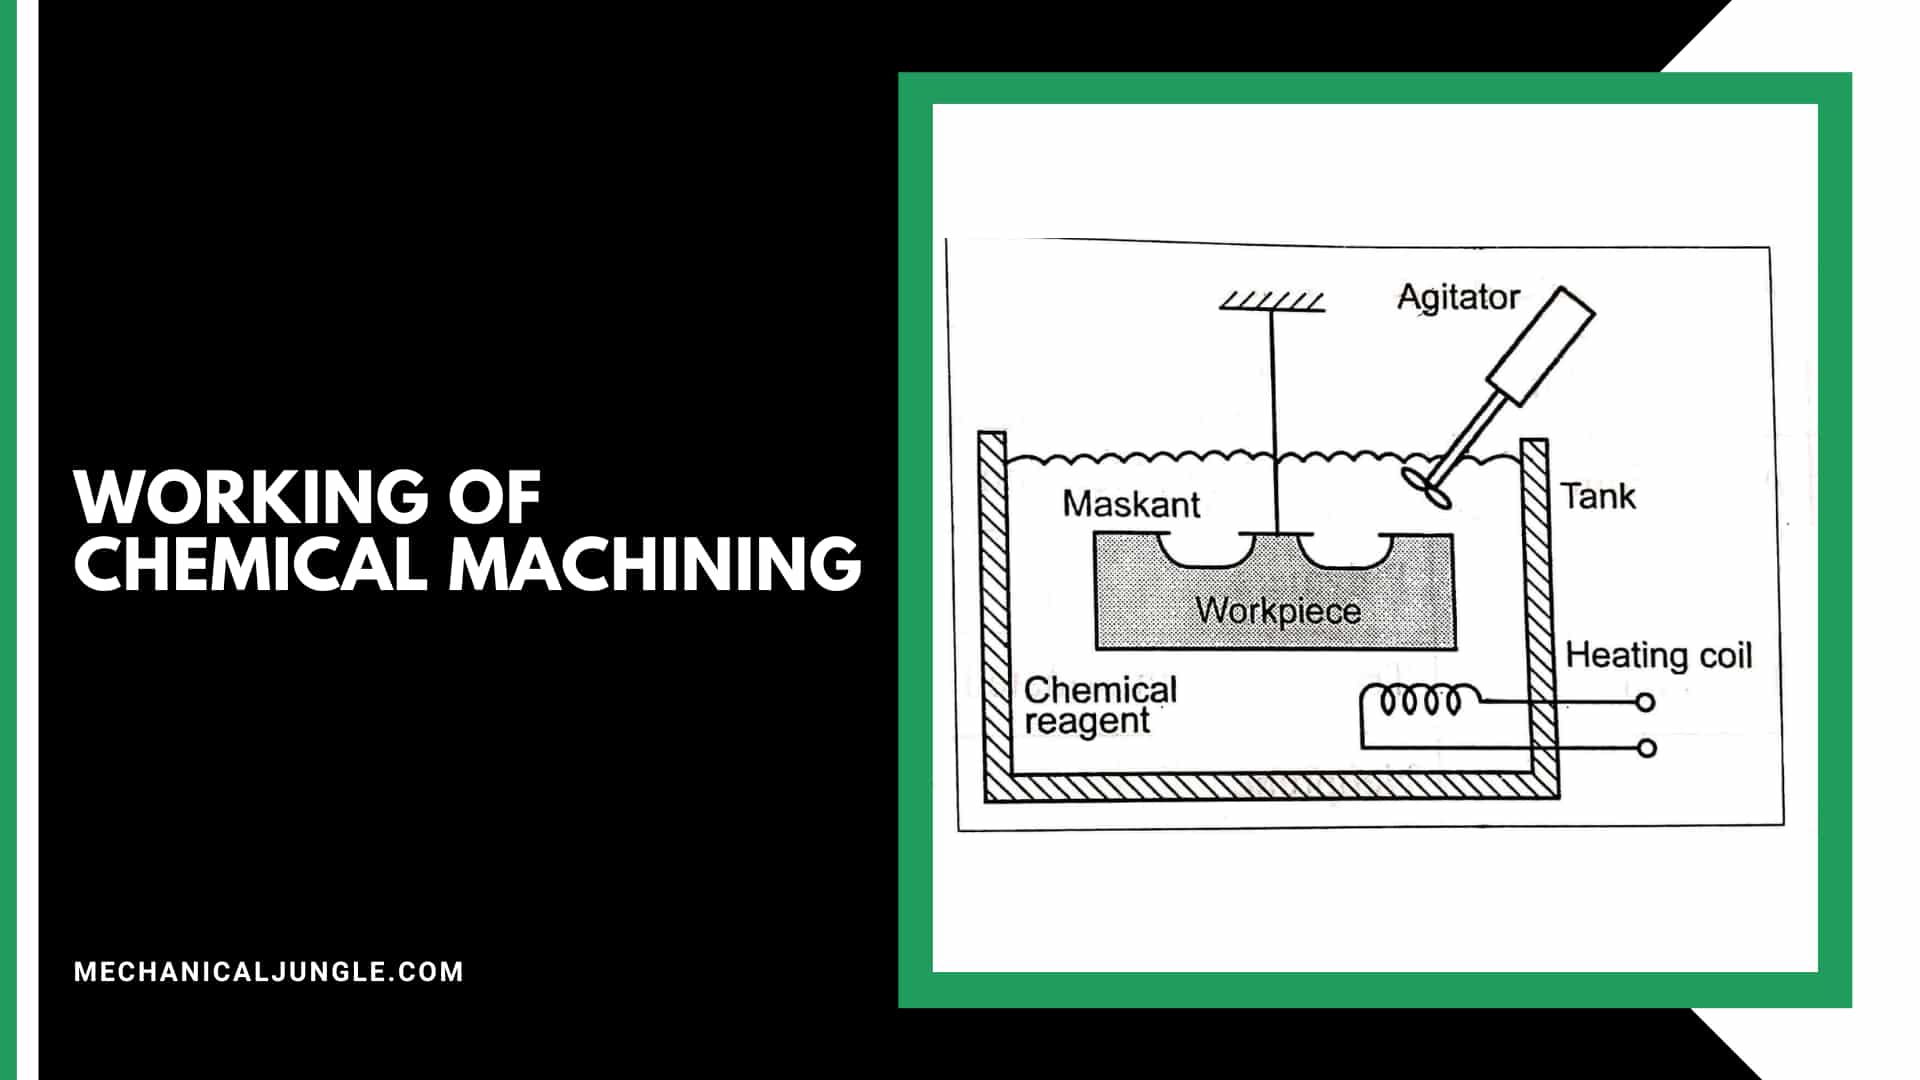 Working of Chemical Machining